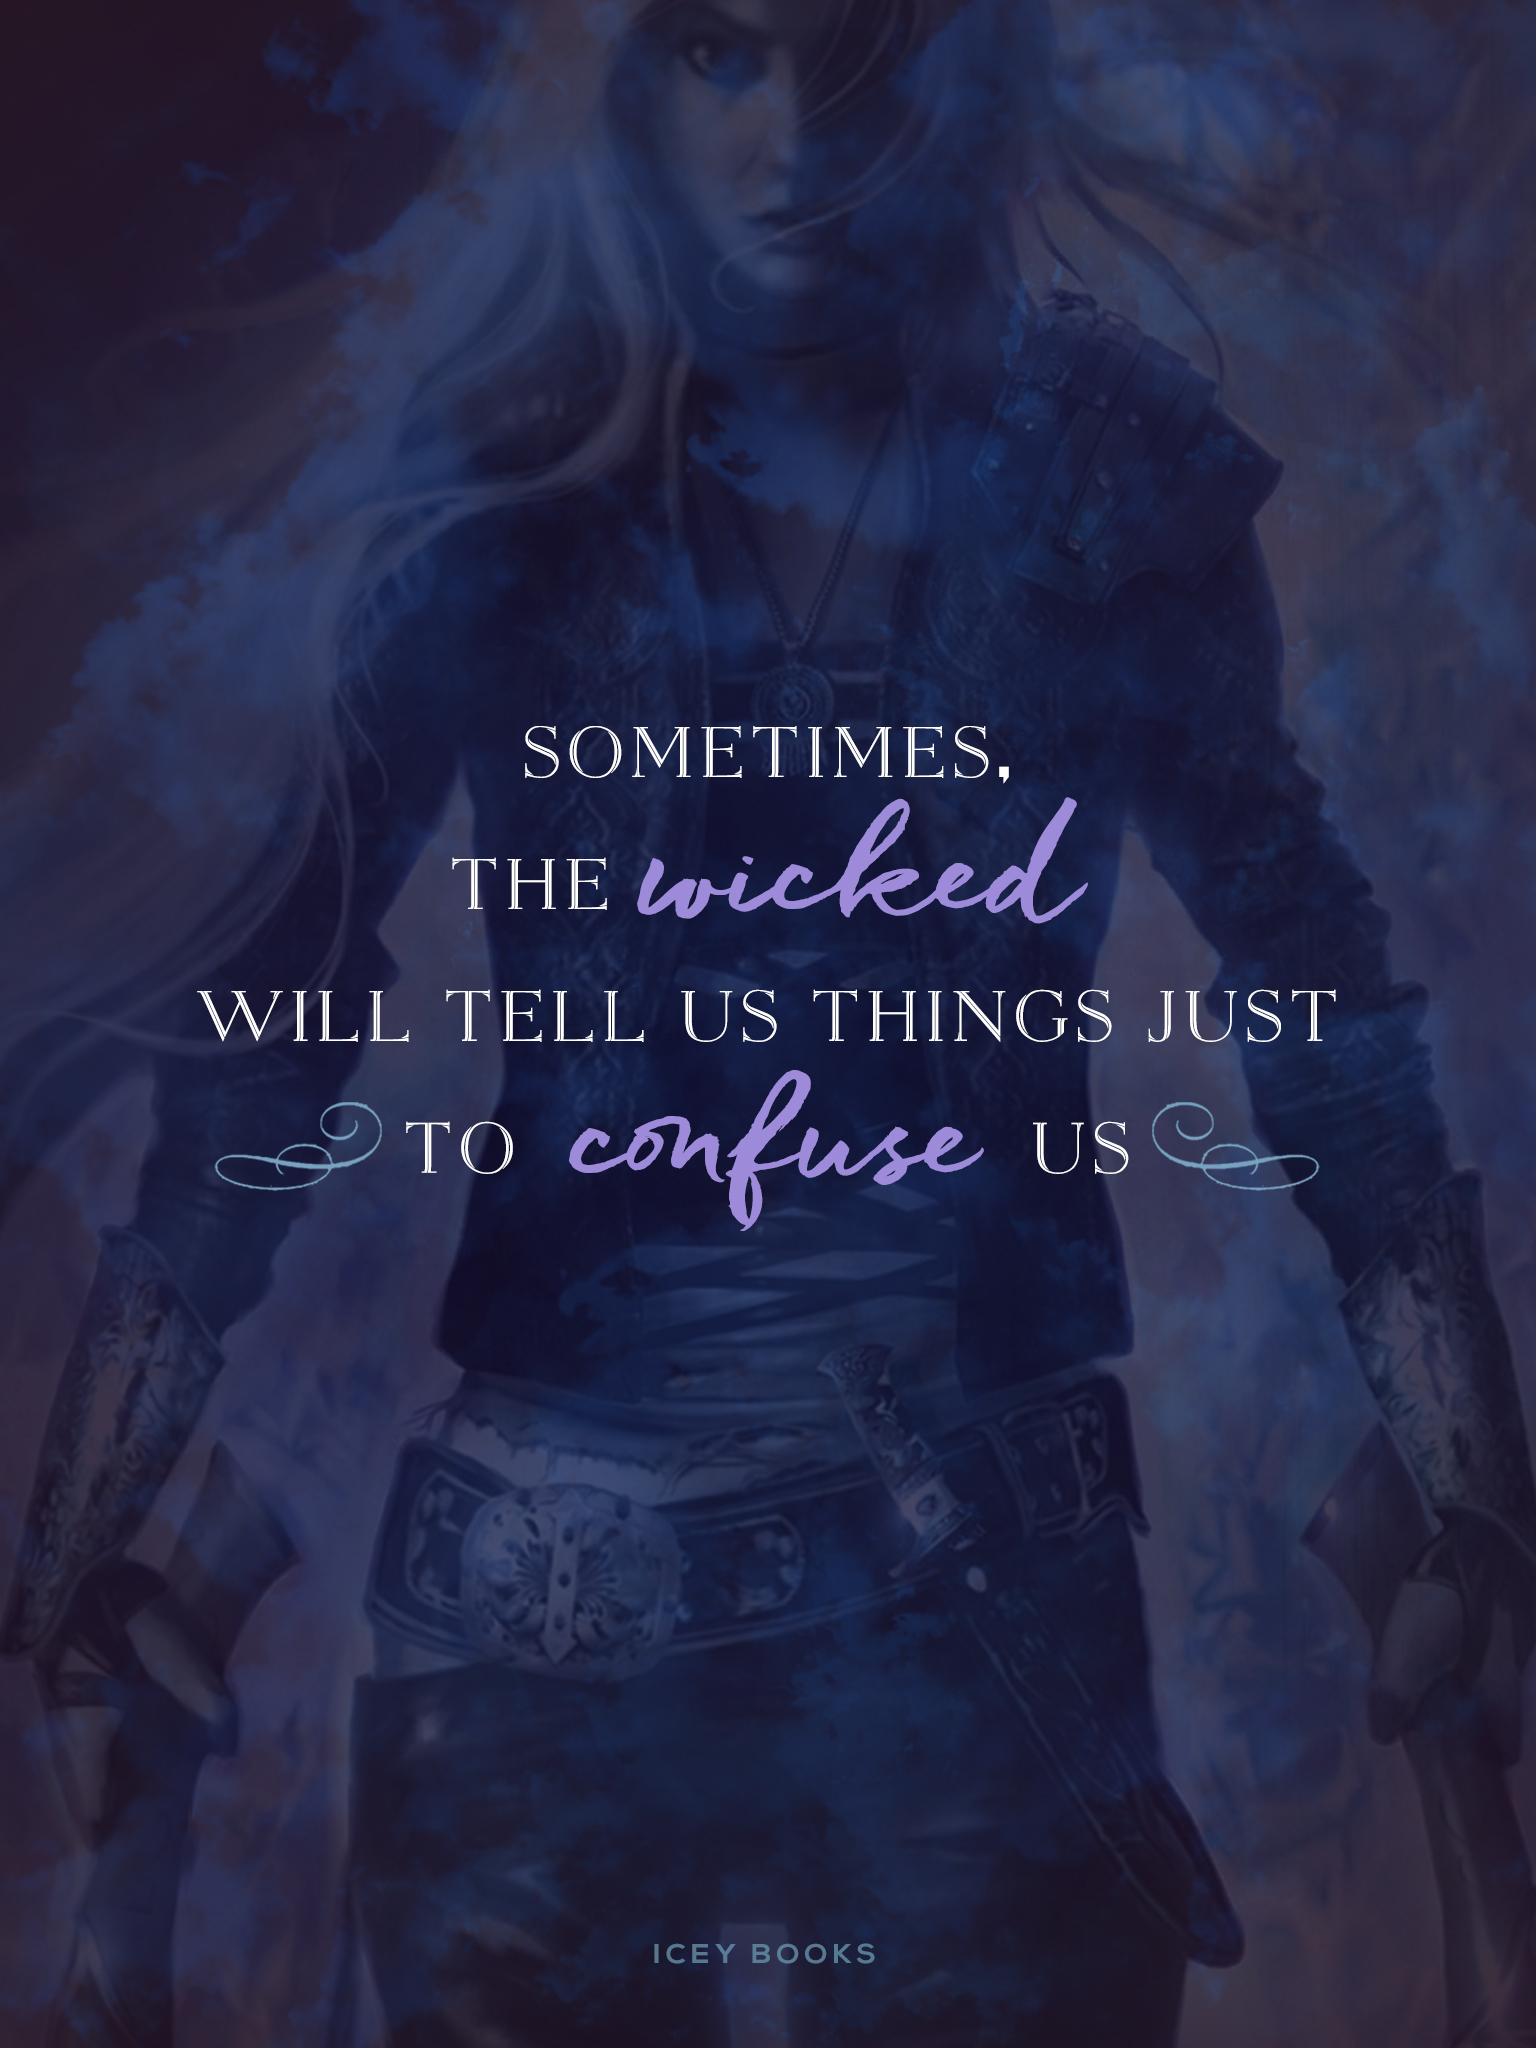 Quote Candy 41 Download a Wallpaper for THRONE OF 1536x2048